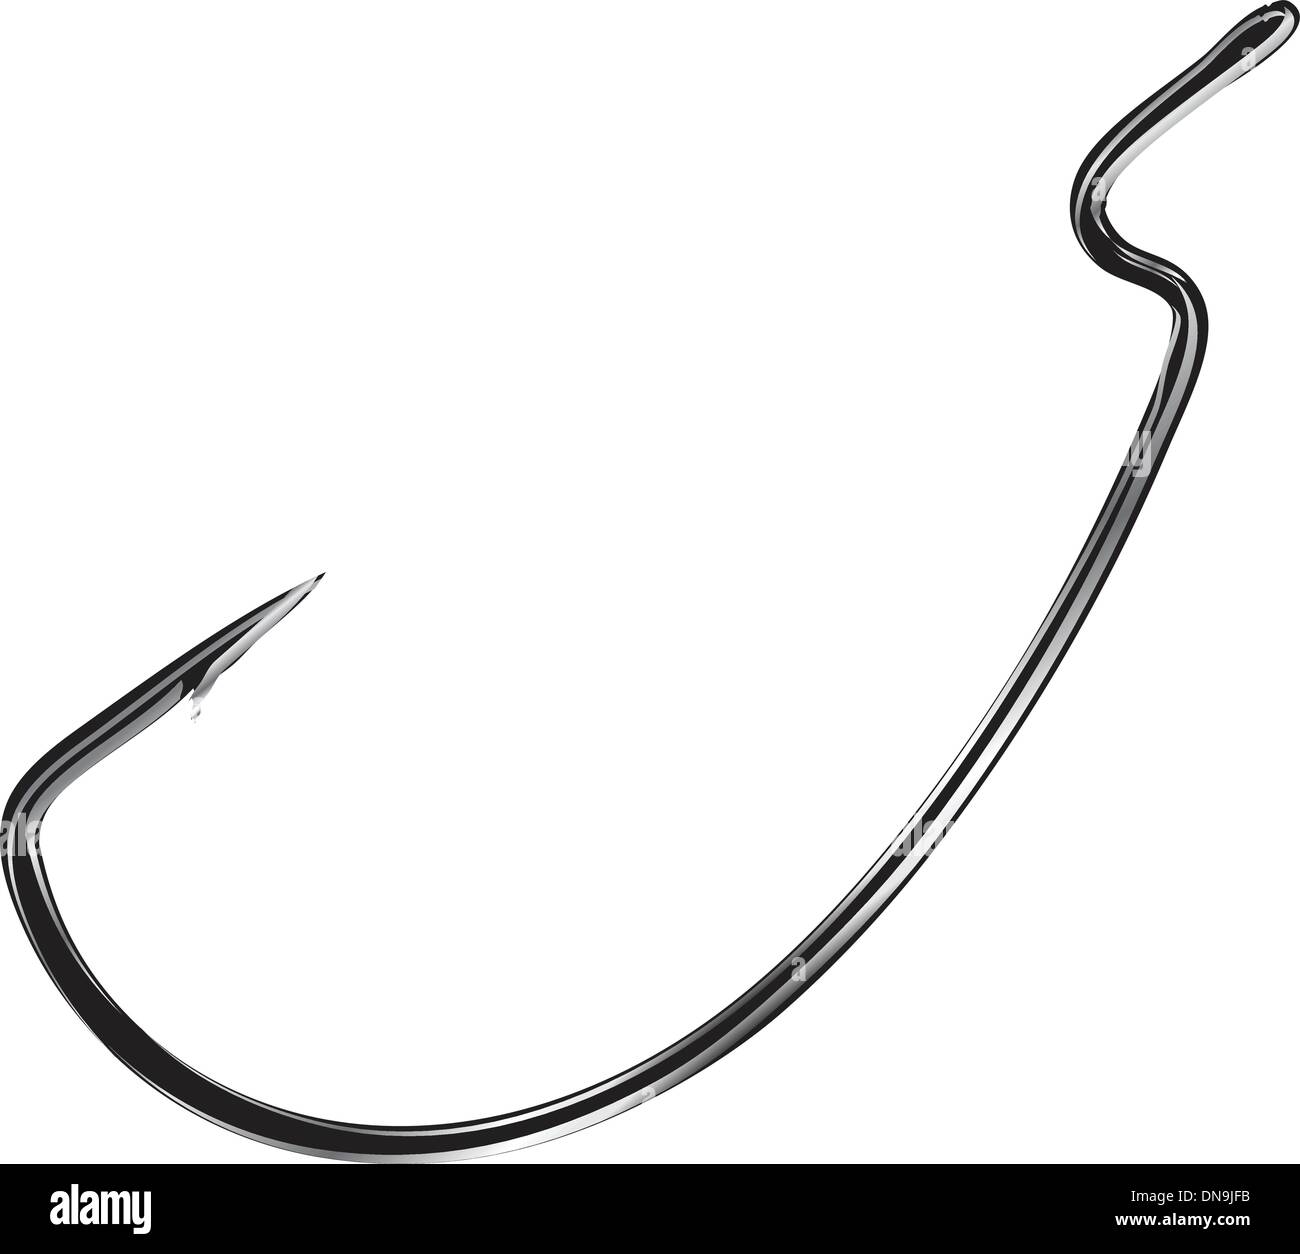 Sport fishing gear Stock Vector Images - Alamy